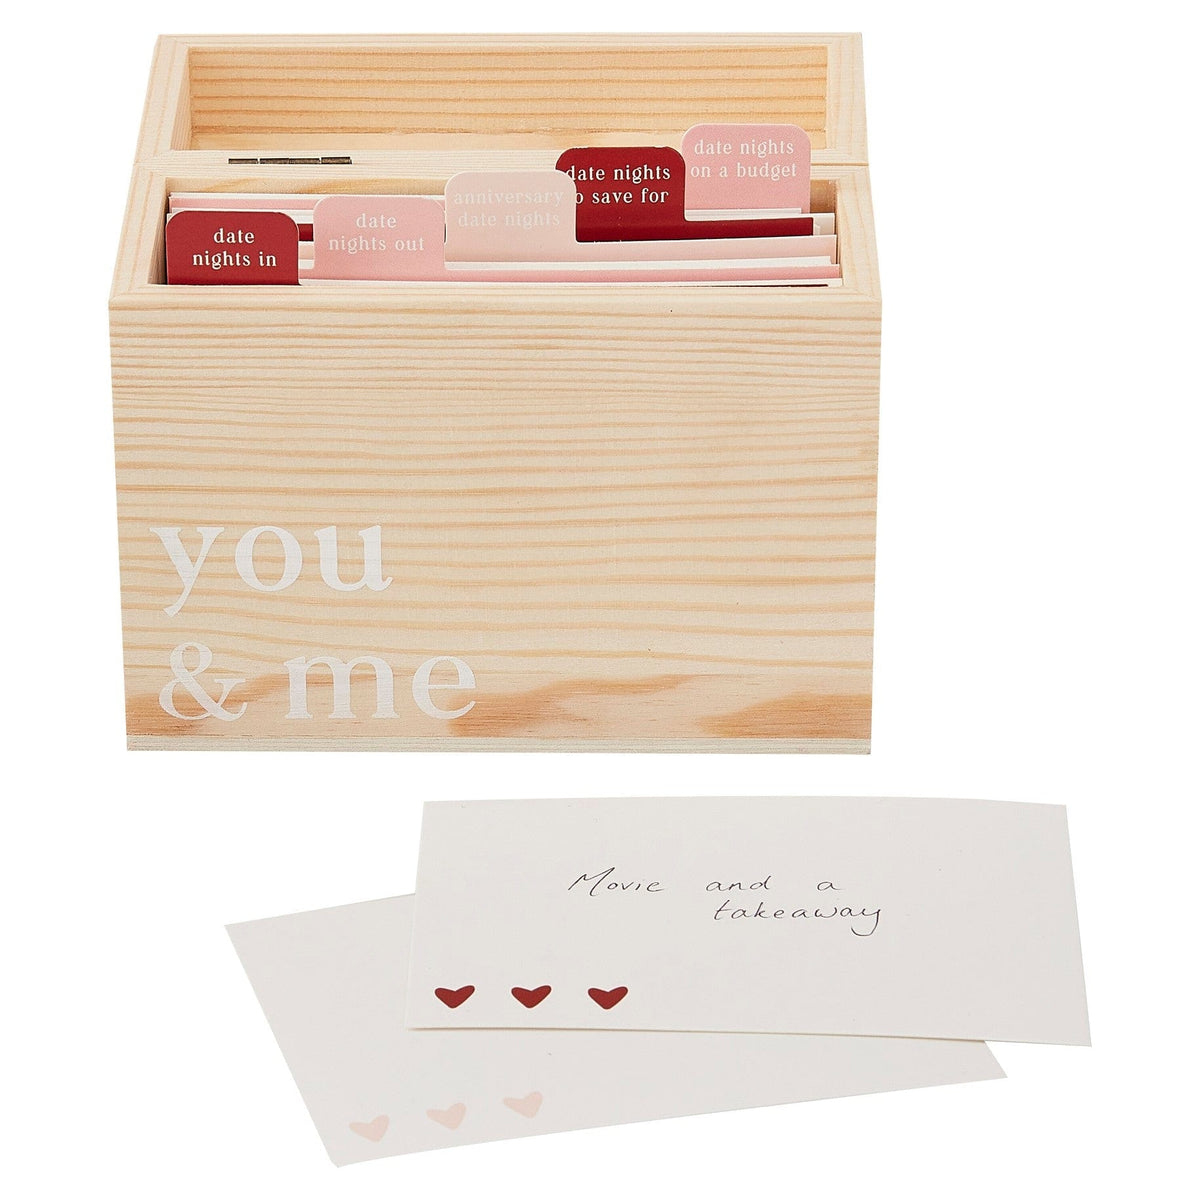 Ginger Ray Wooden Date Night Box